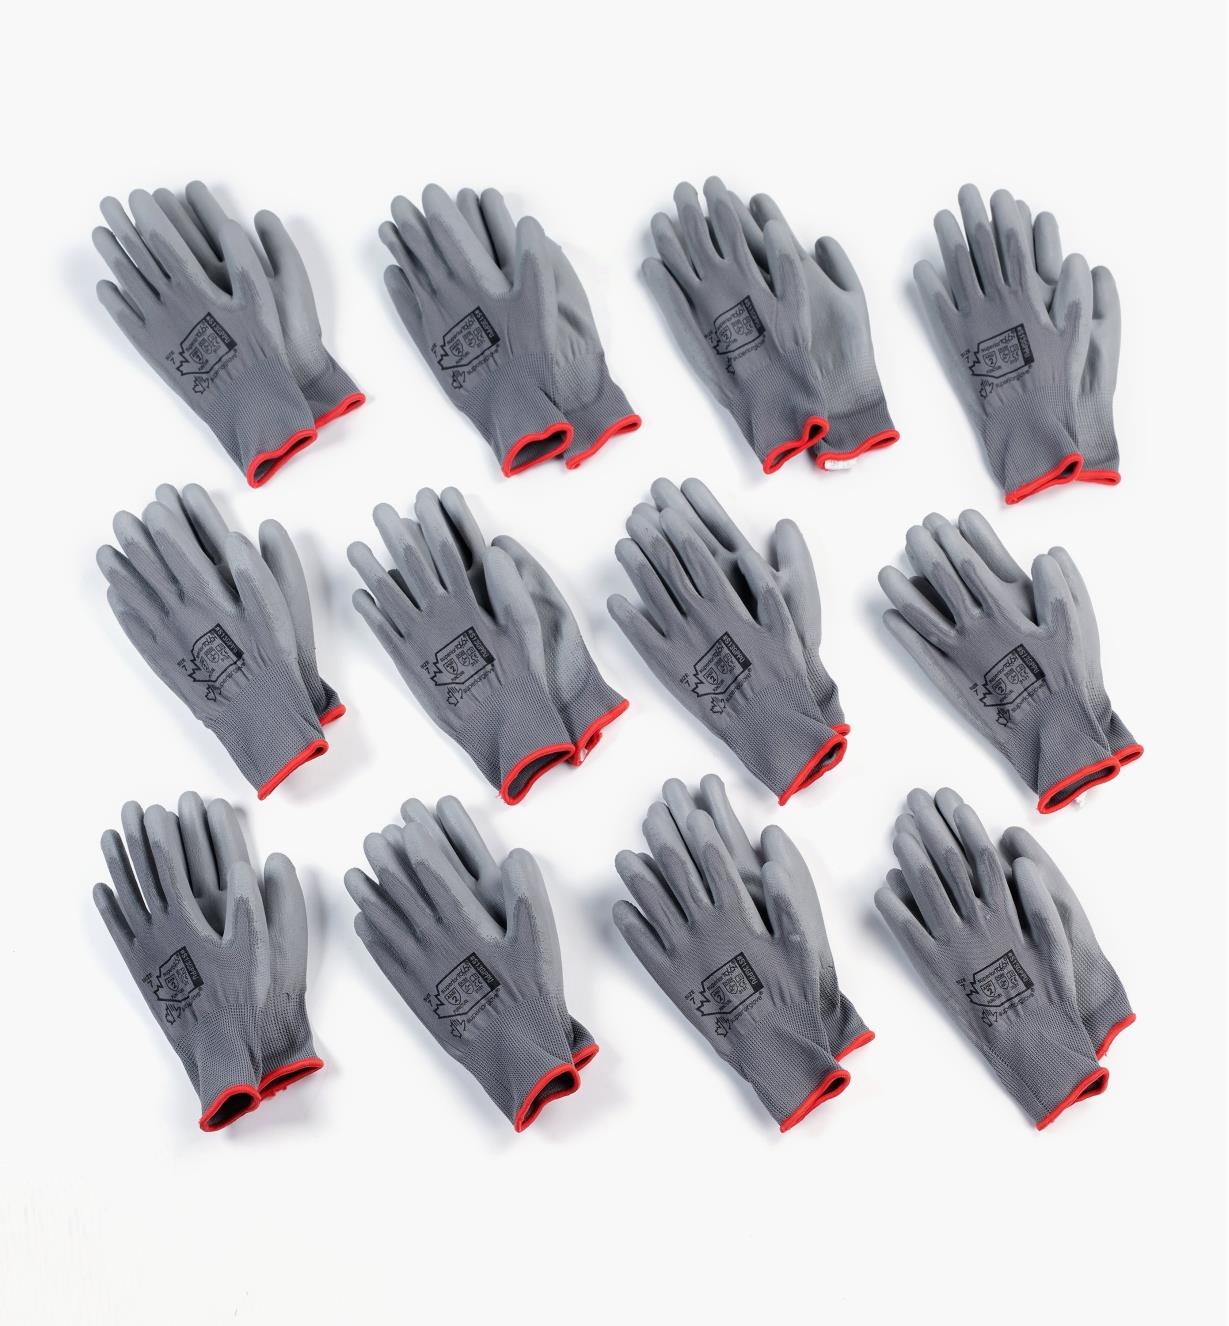 99W8686 - Small (size 7) Gloves, 12 pairs